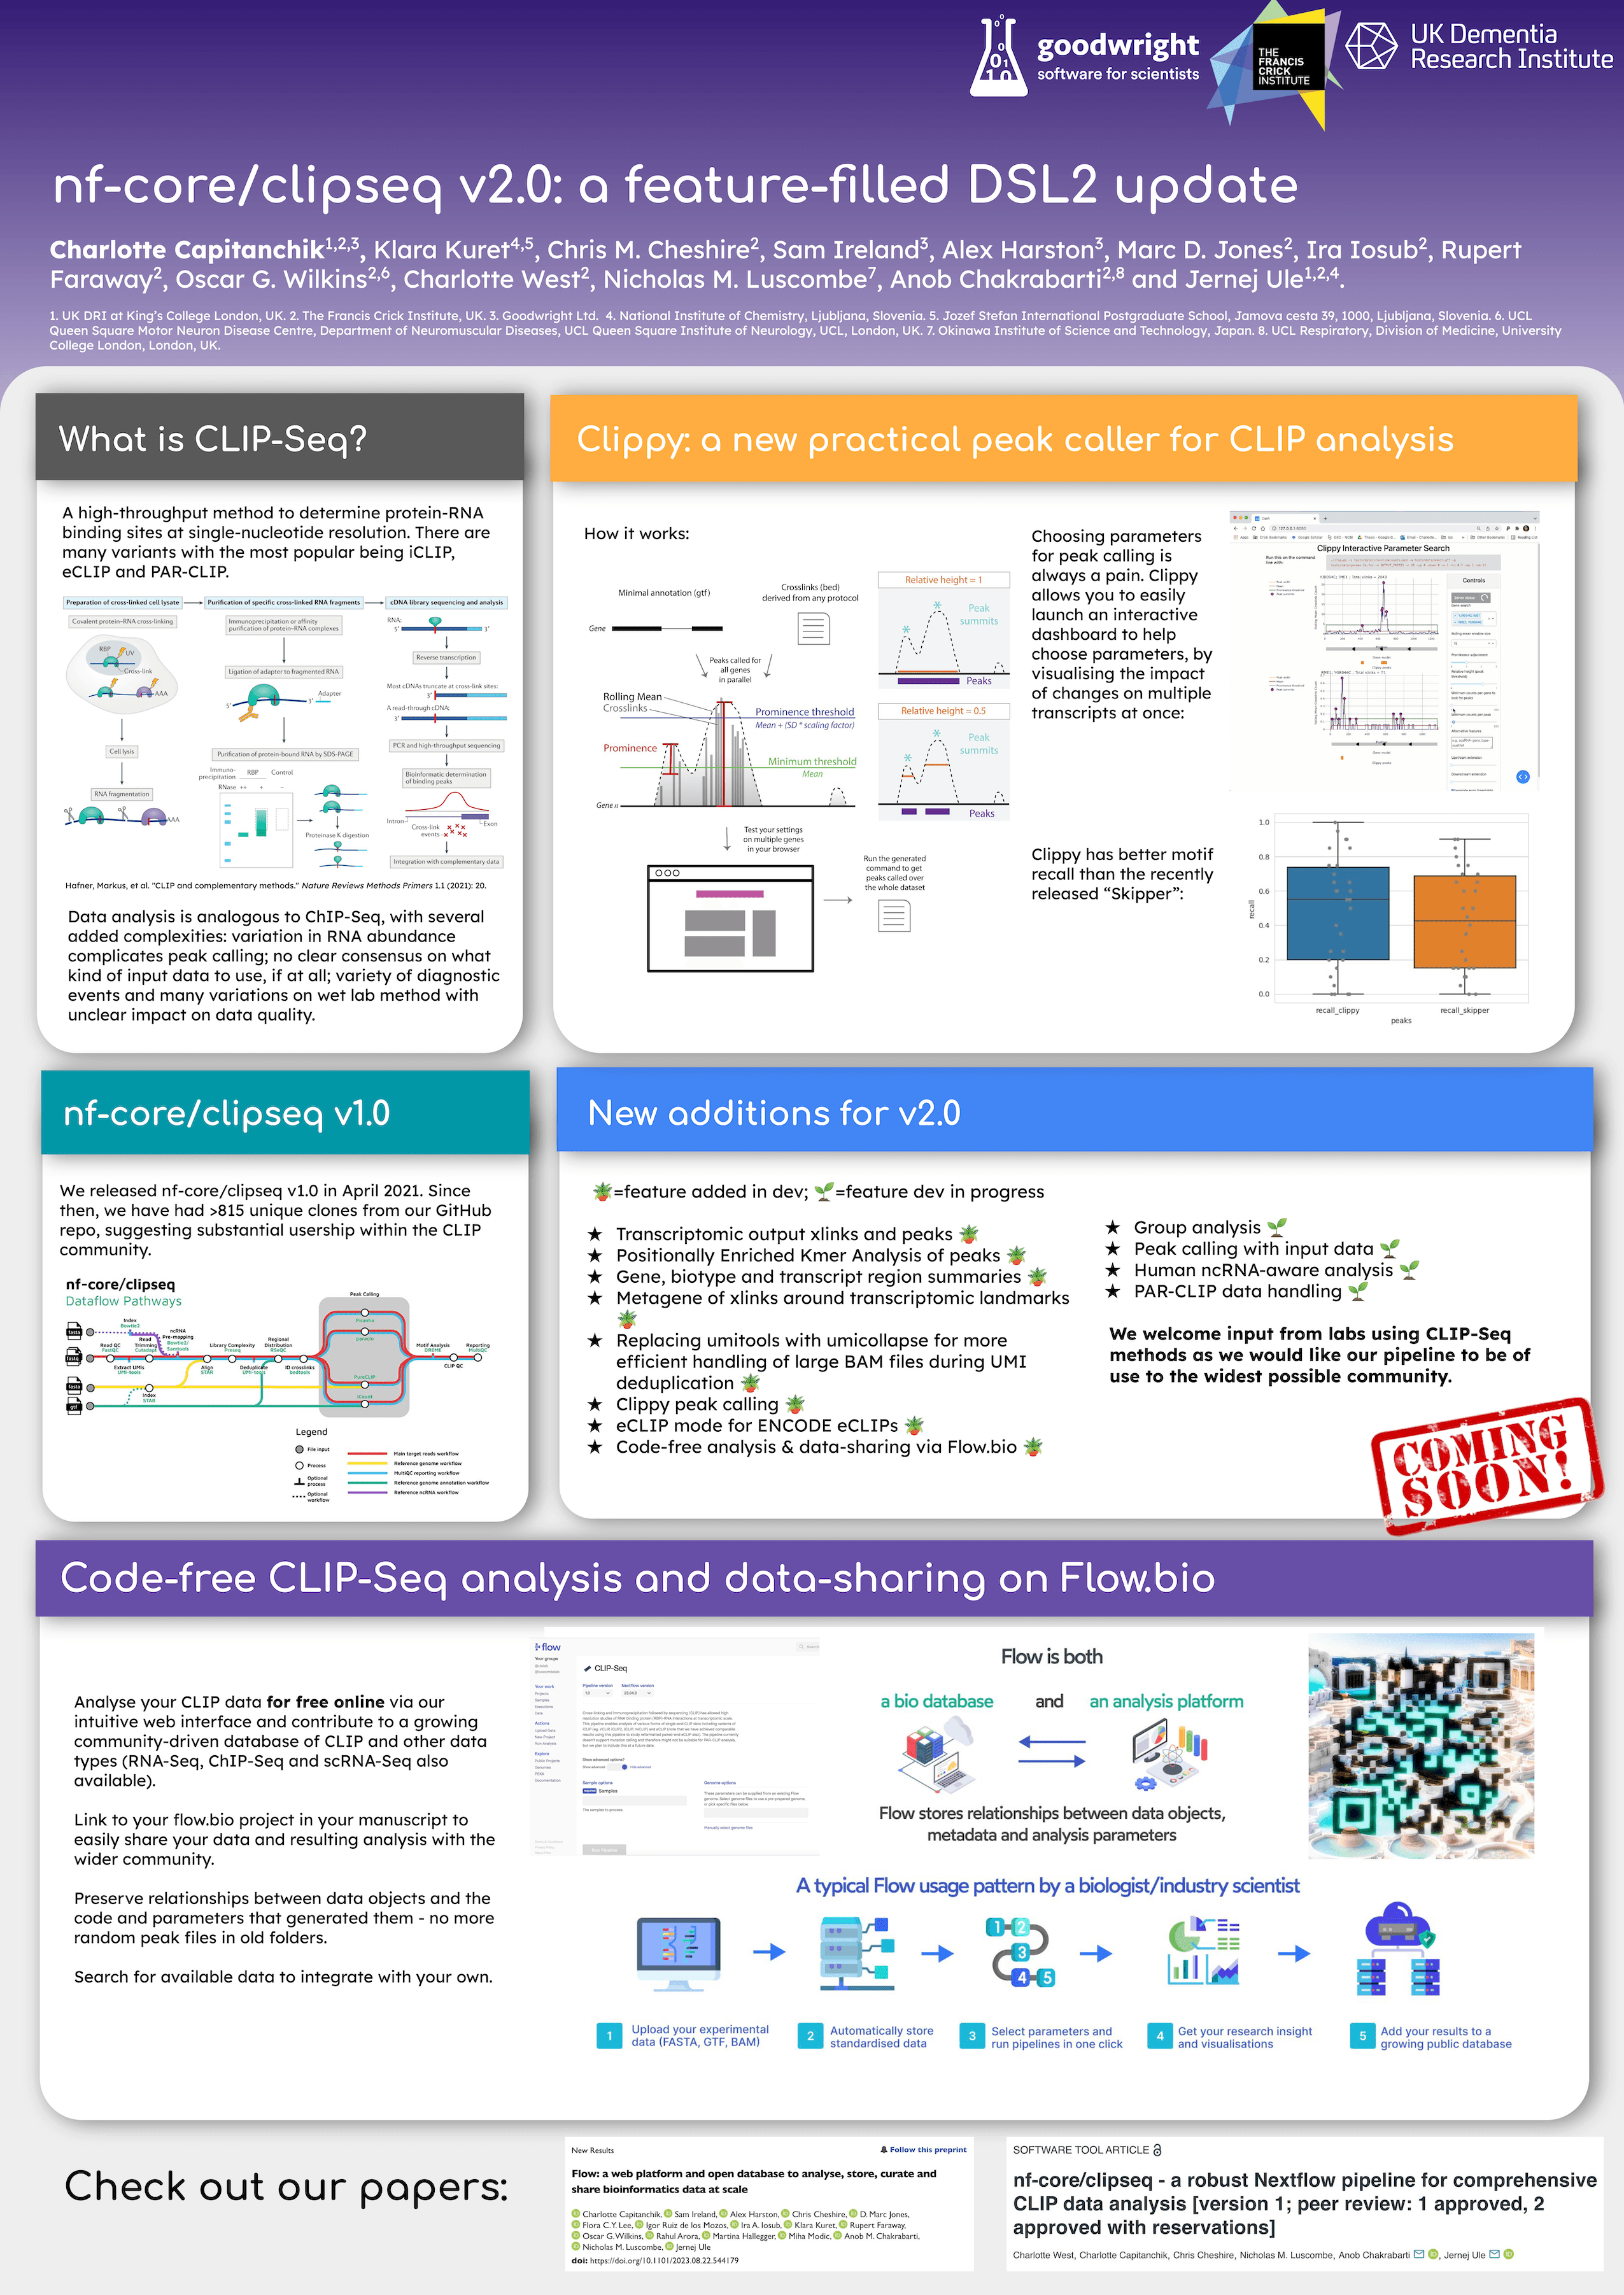 nf-core/clipseq 2.0 - a robust Nextflow pipeline for comprehensive CLIP data analysis